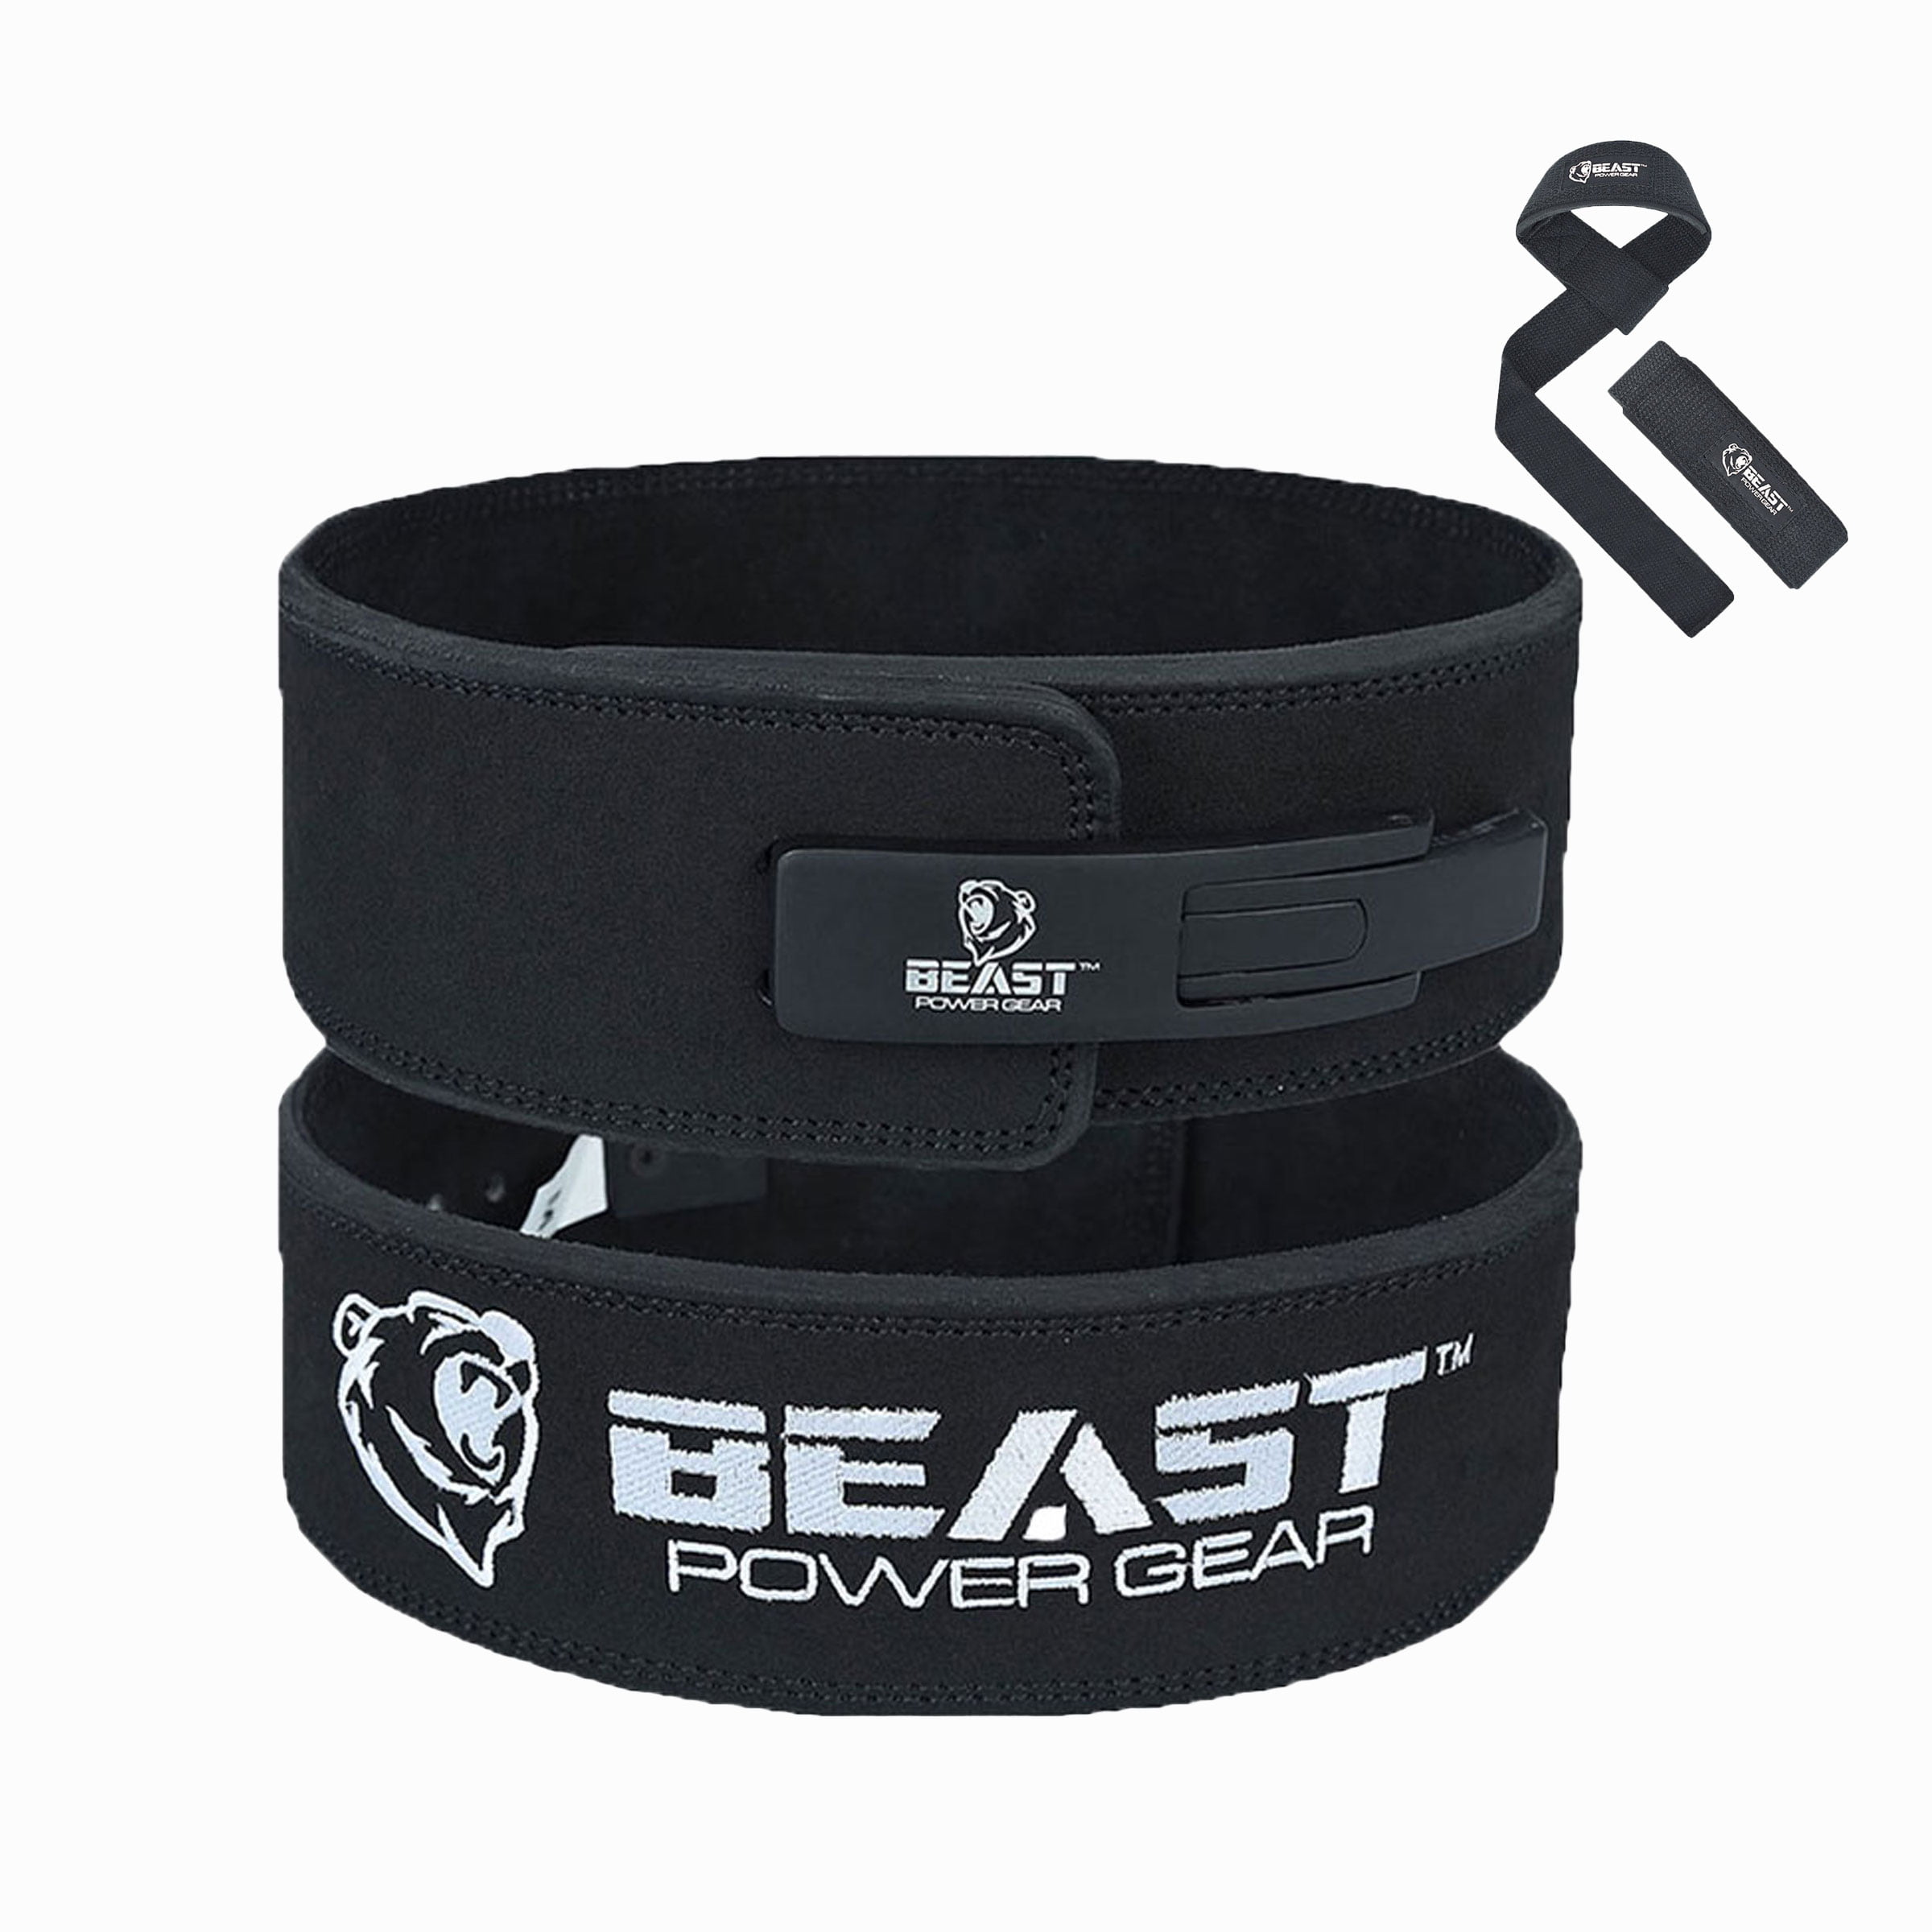 SMALL PREMIUM TRAINING WEIGHT LIFTING BELT W/ LEVER BUCKLE LONG LAST HEAVY DUTY 